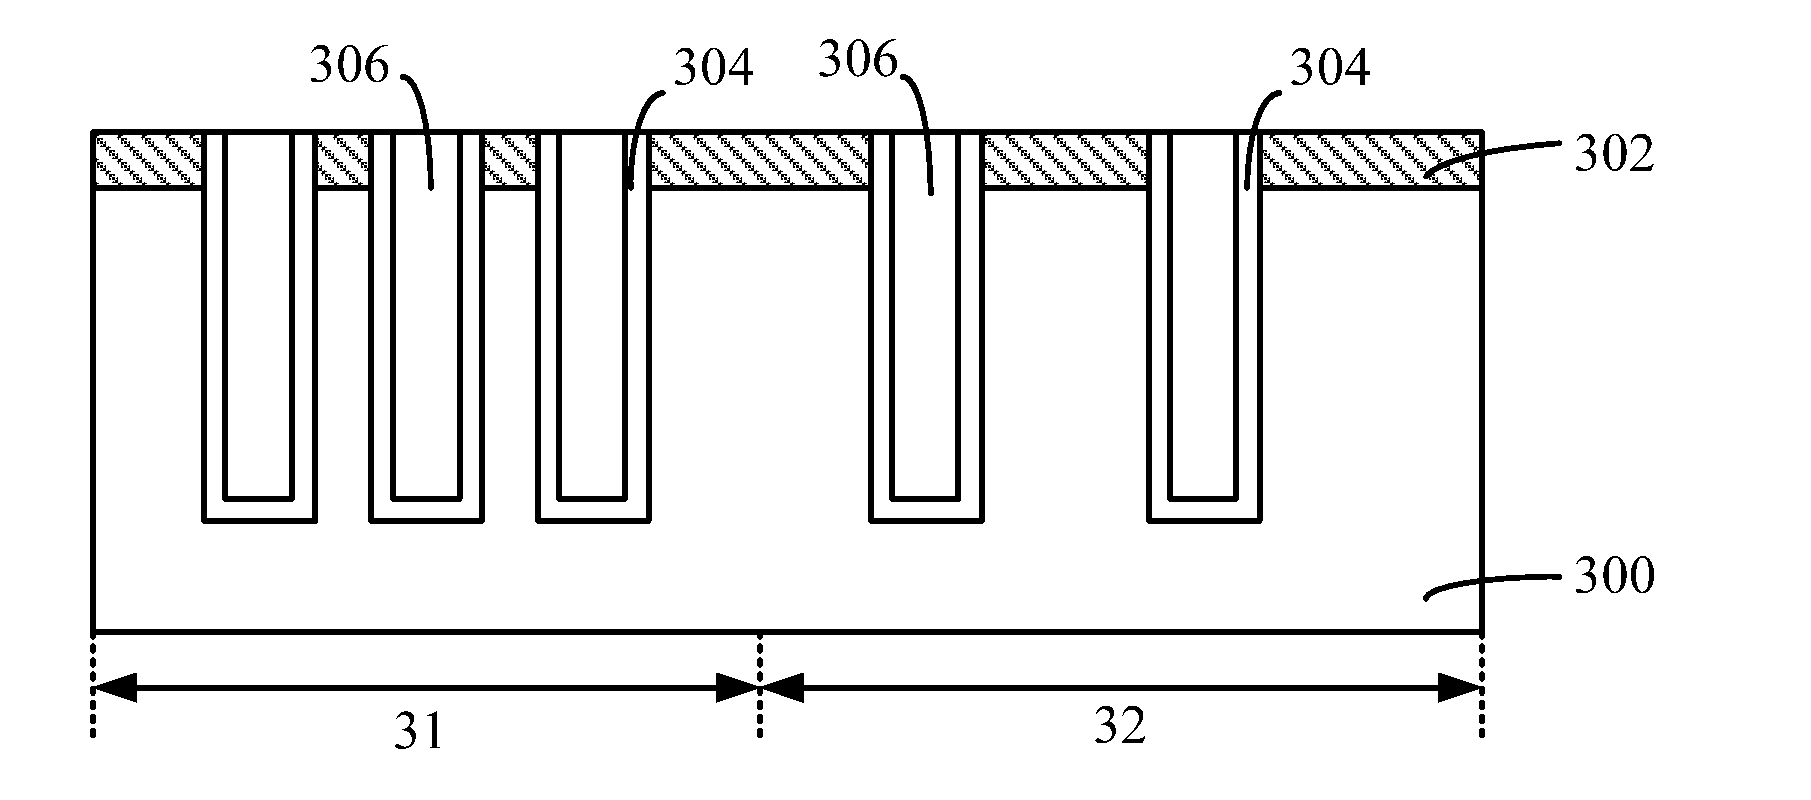 TSV layout structure and TSV interconnect structure, and fabrication methods thereof